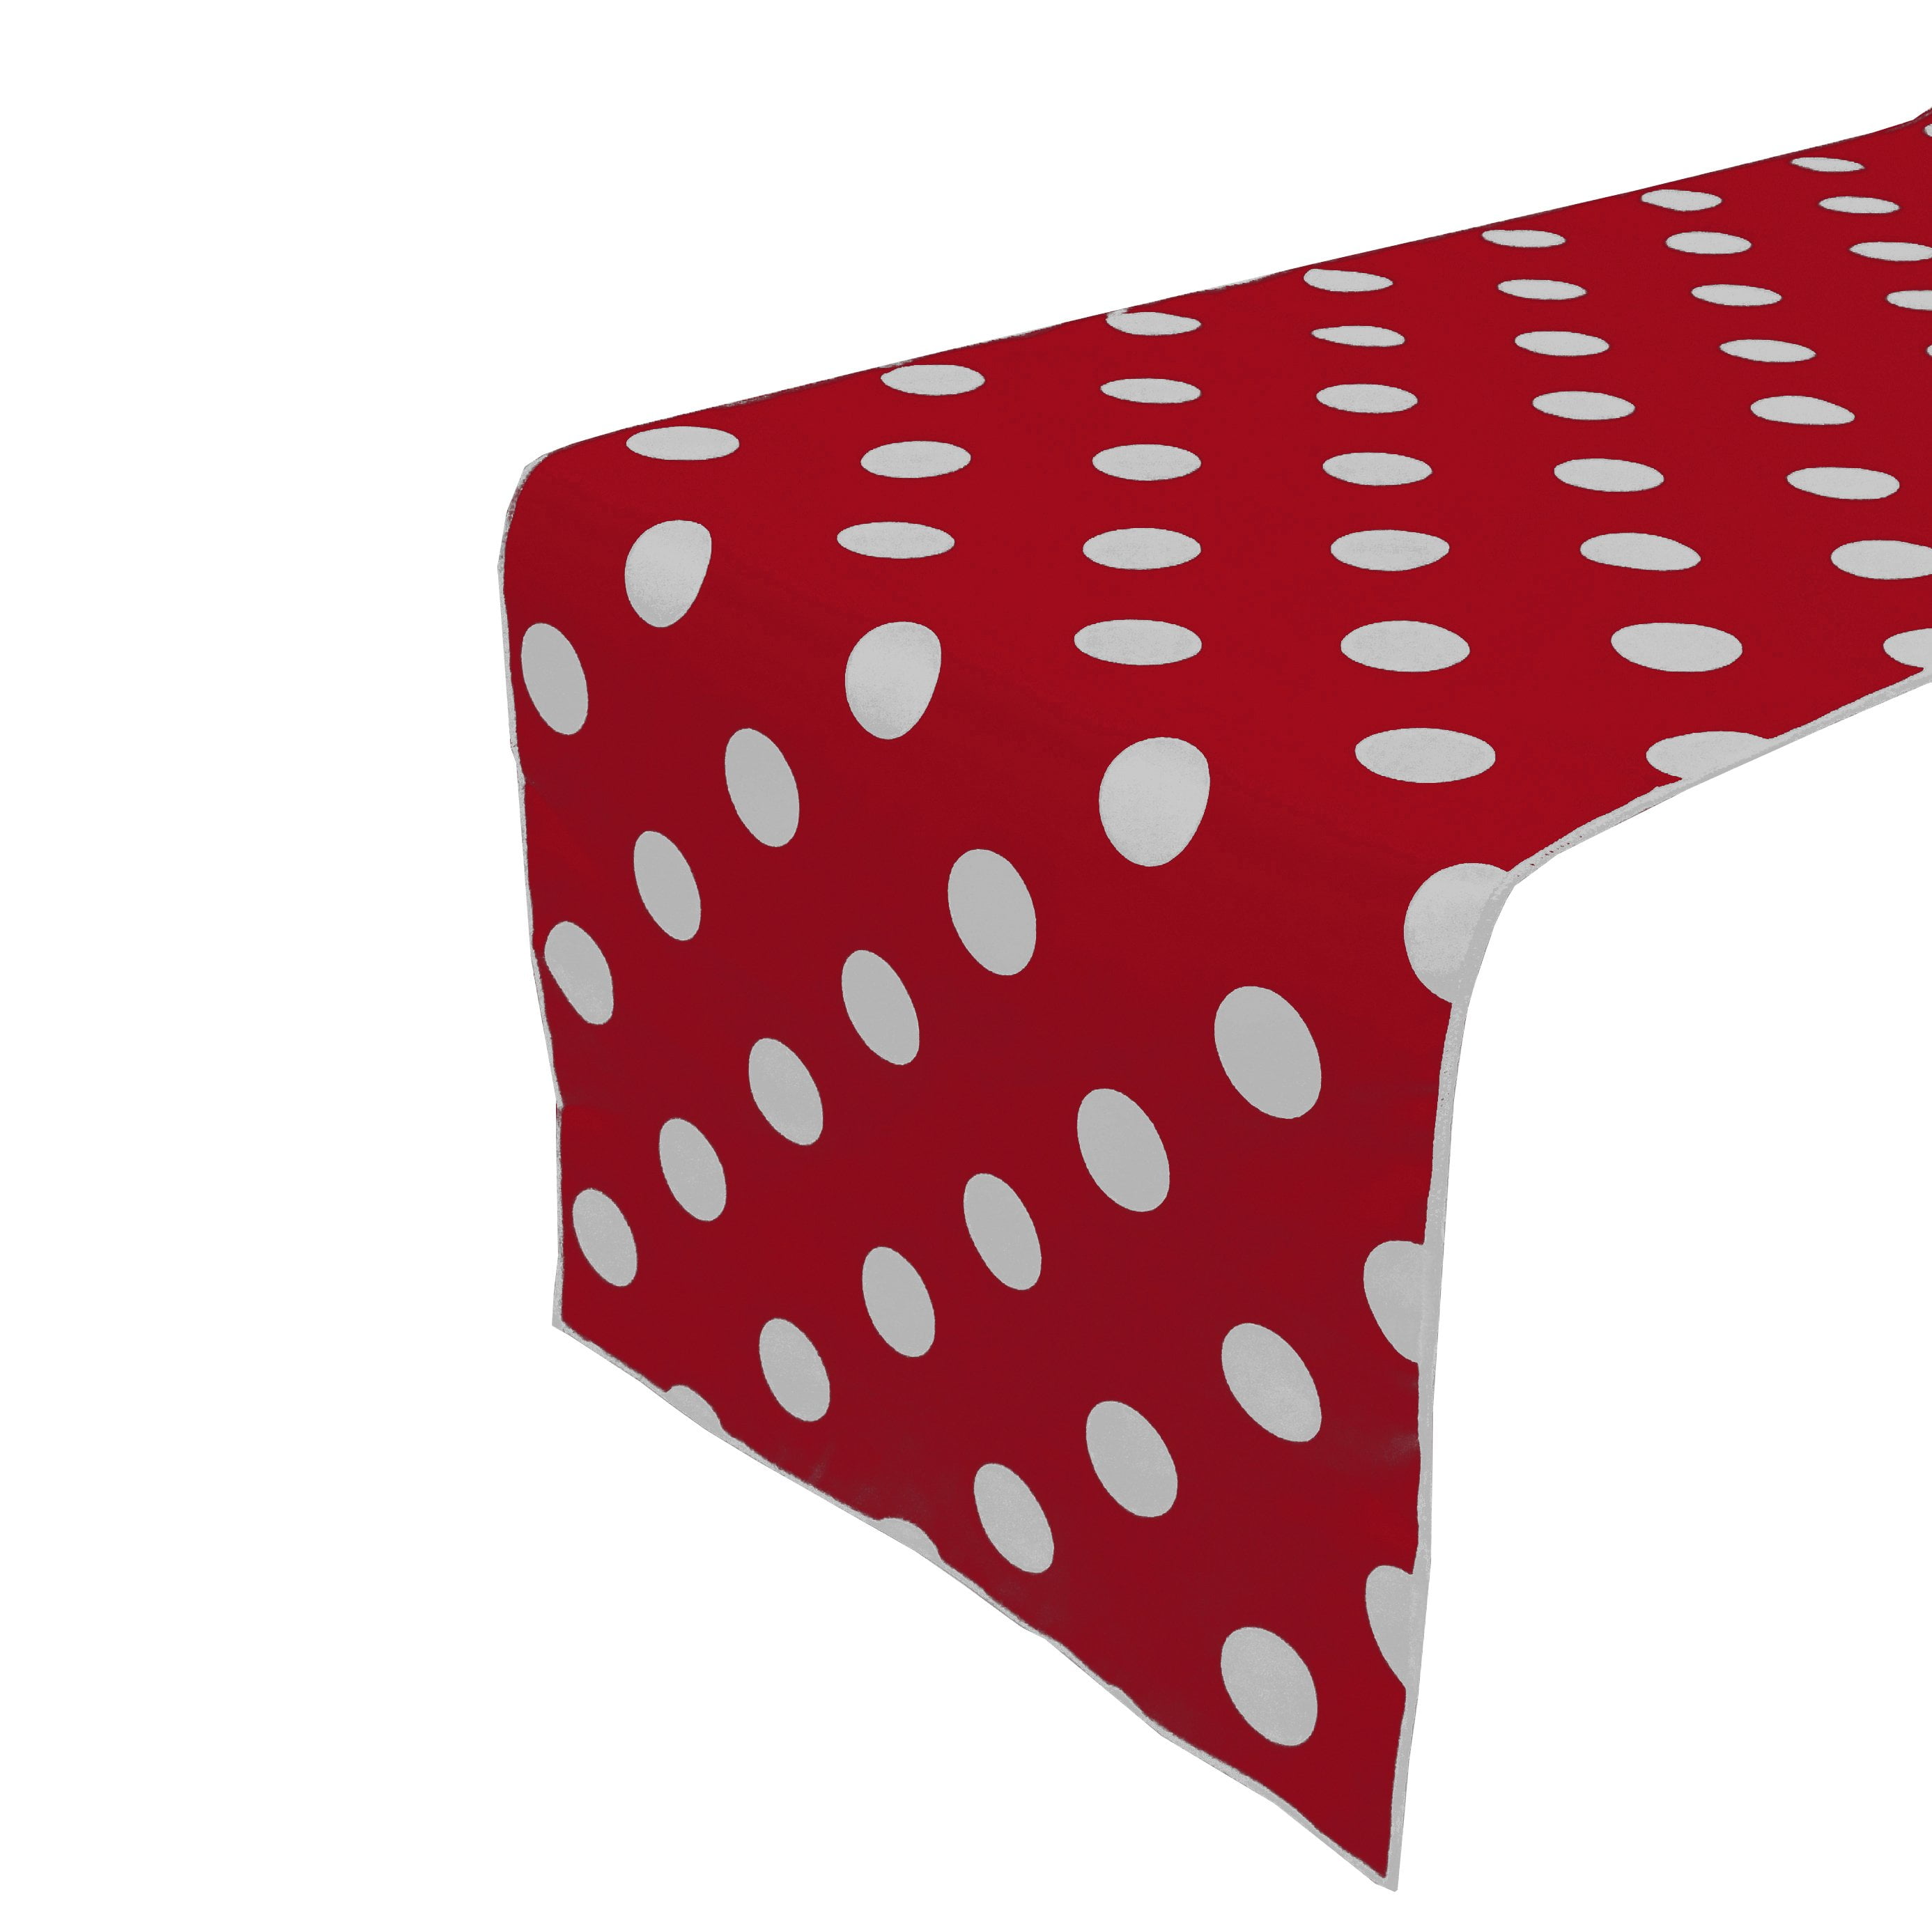 WHITE POLKA DOT PURE 100% COTTON TABLE CLOTH COVER RED NAPKINS LINEN 